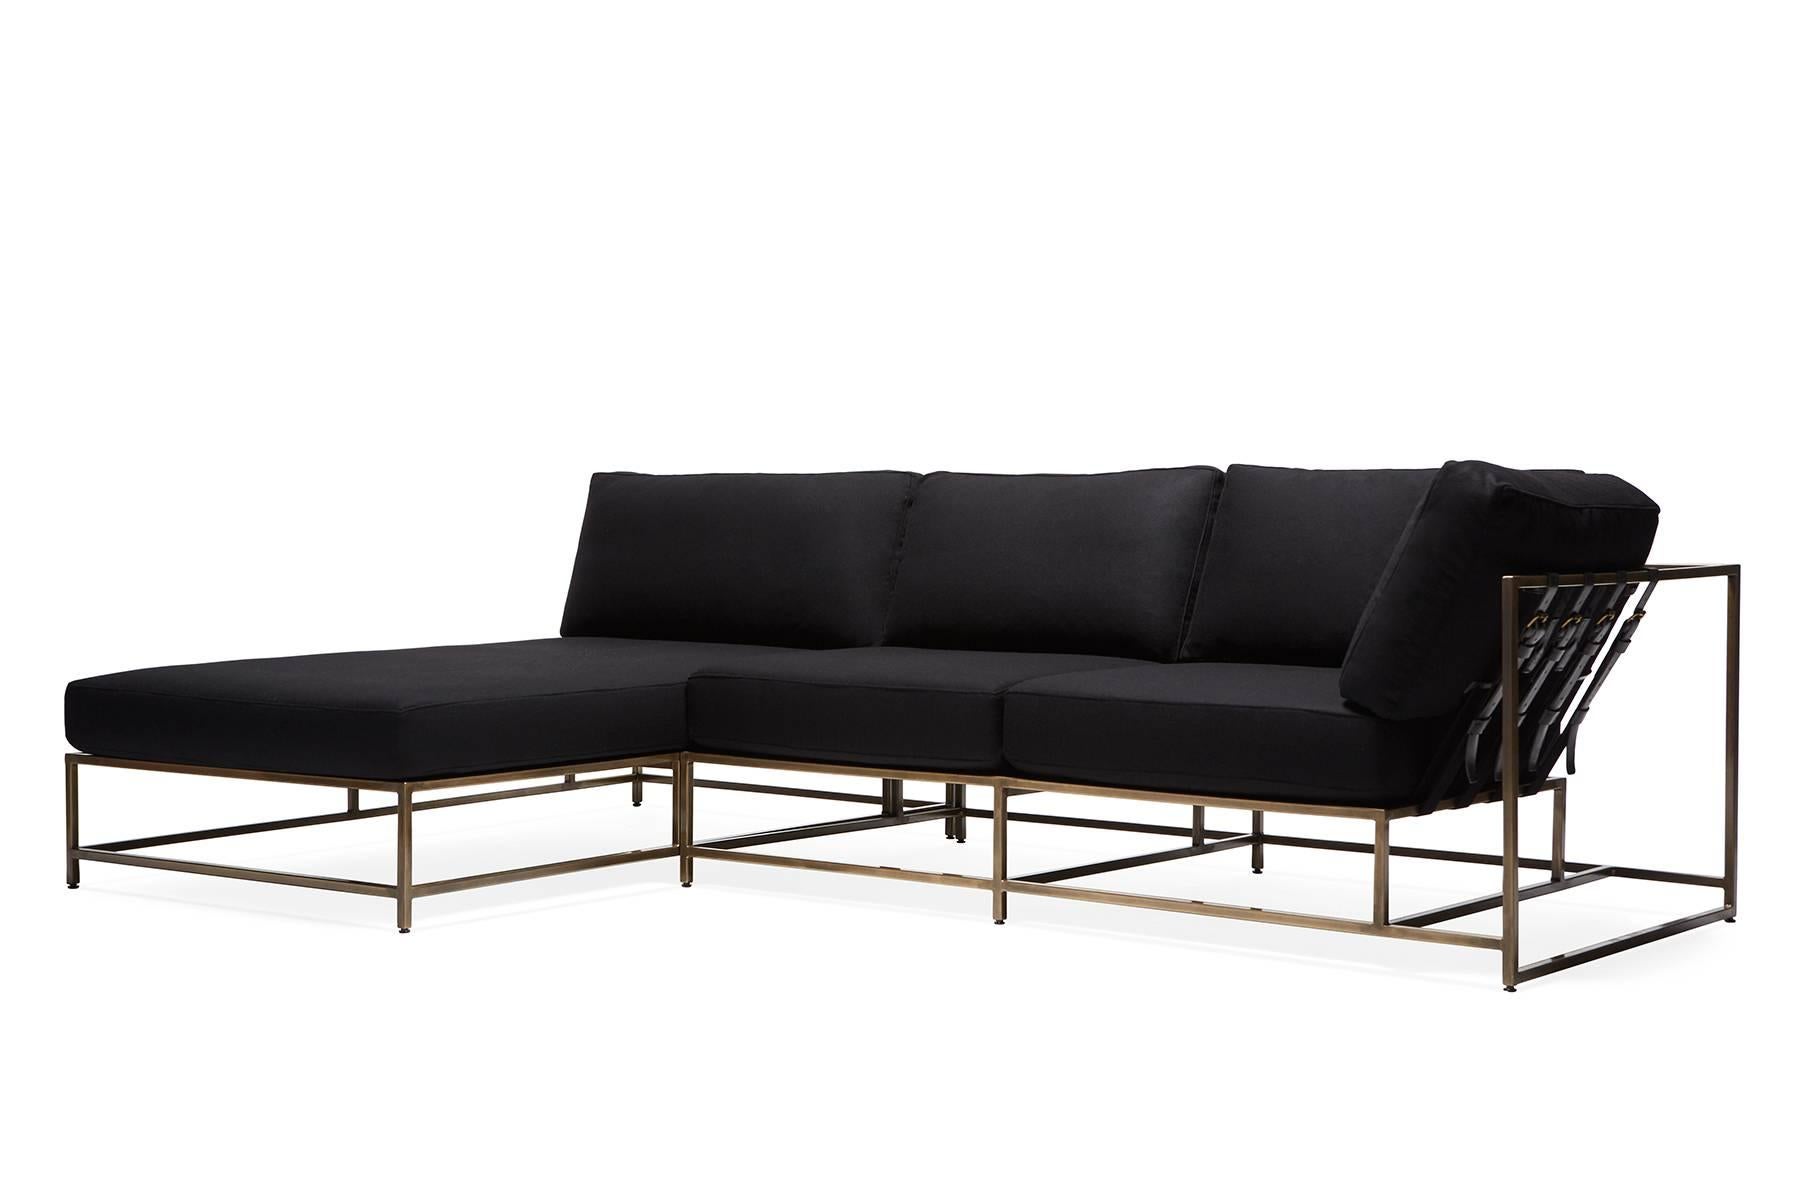 A small sectional style piece with an antique brass frame finish and charcoal wool blend upholstery. This item can function as two independent pieces, or be placed together as a larger sectional style sofa and chaise longue.

Dimensions: 111 W x 38